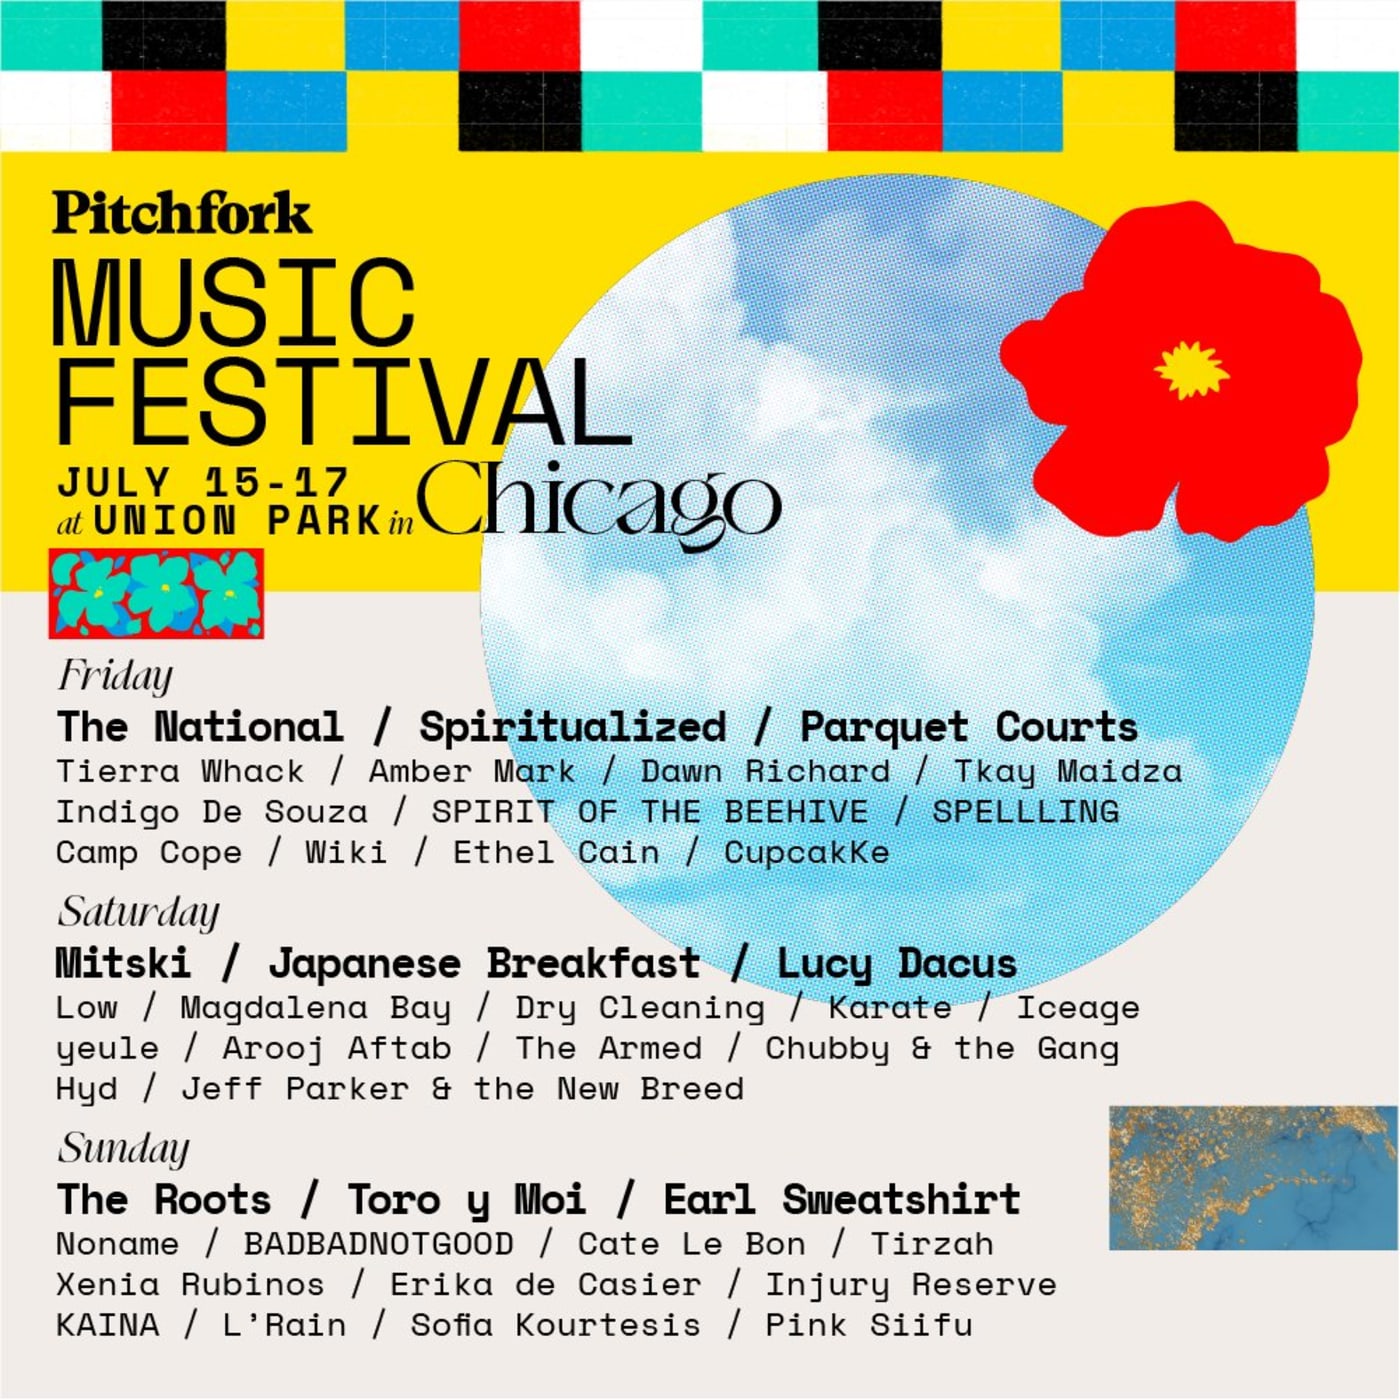 A flyer for the Pitchfork festival is shown